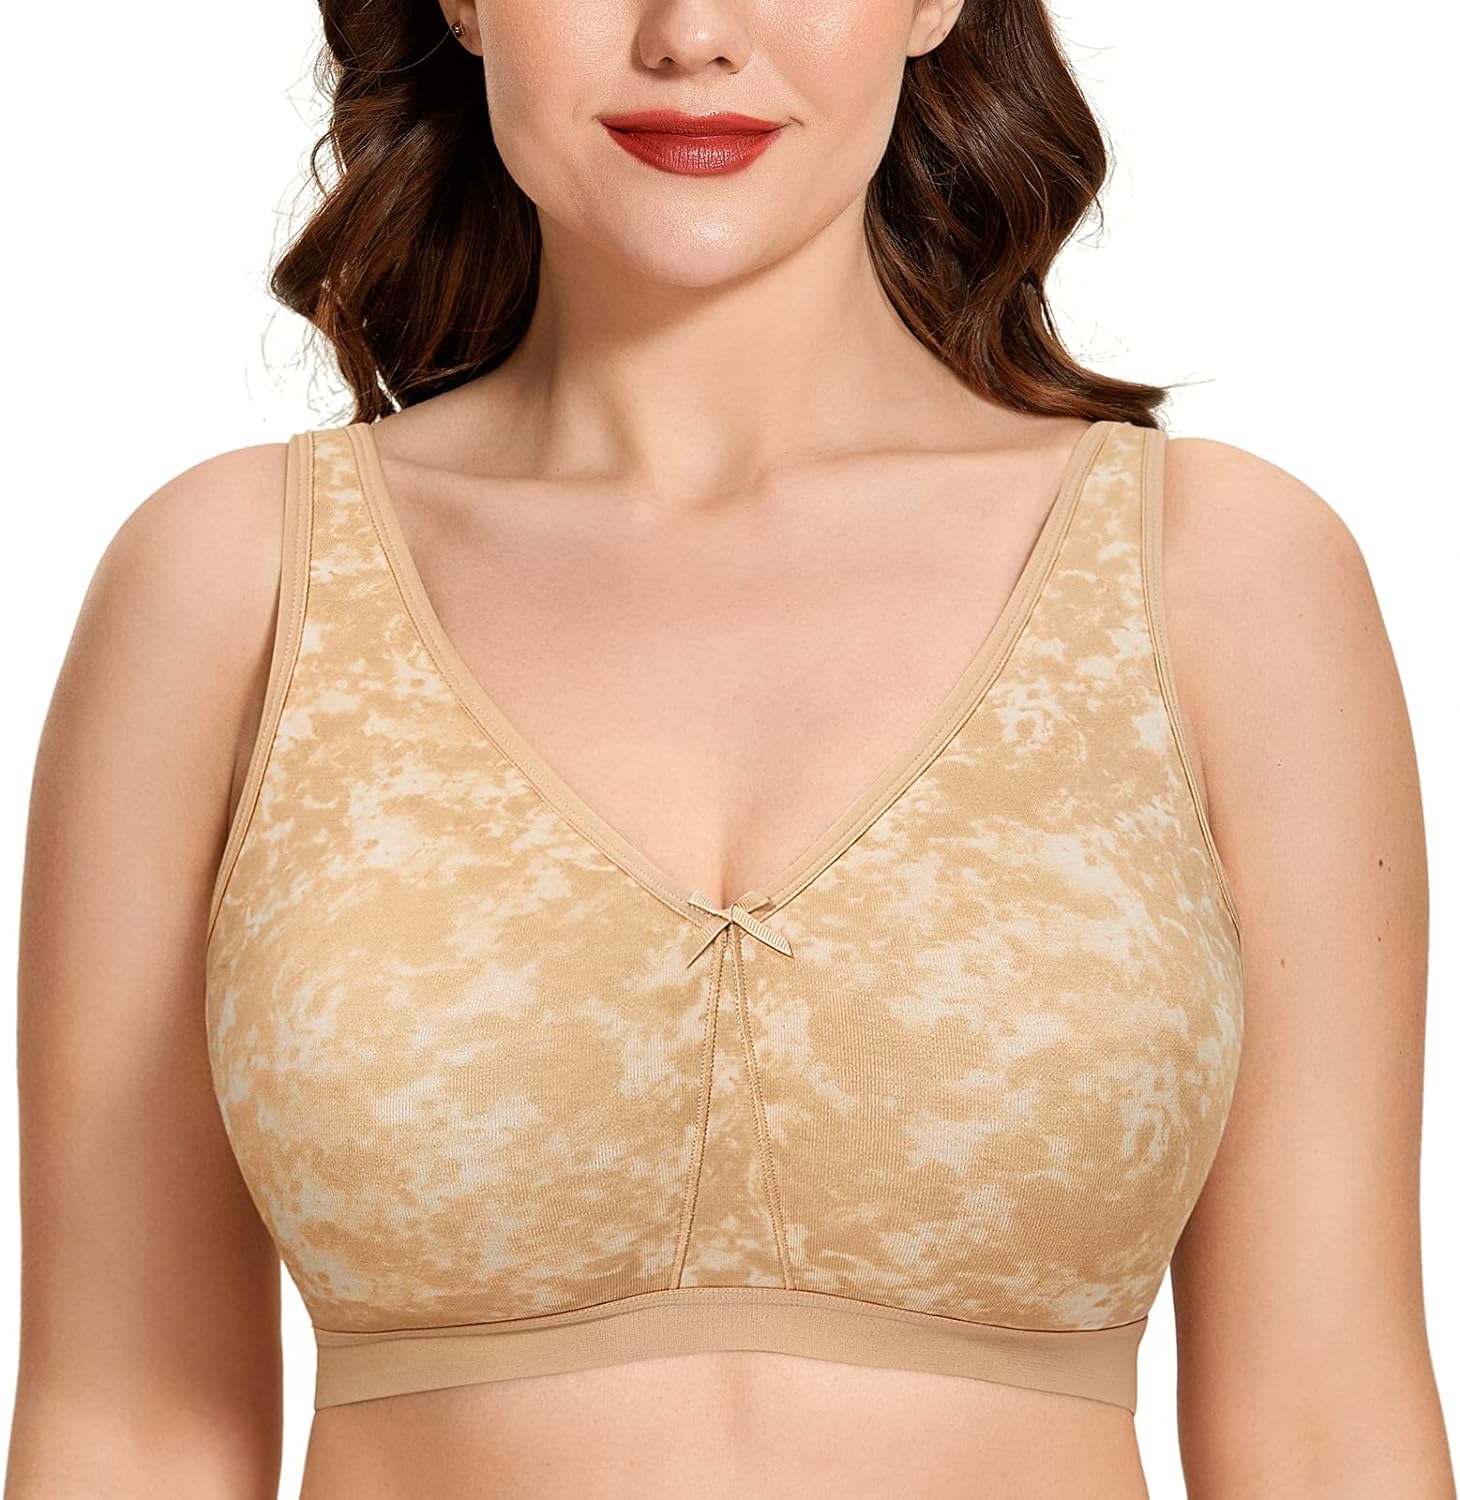  AISILIN Womens Wireless Plus Size Bra Cotton Support Comfort  Unlined Sleep Smoke Fills The Air